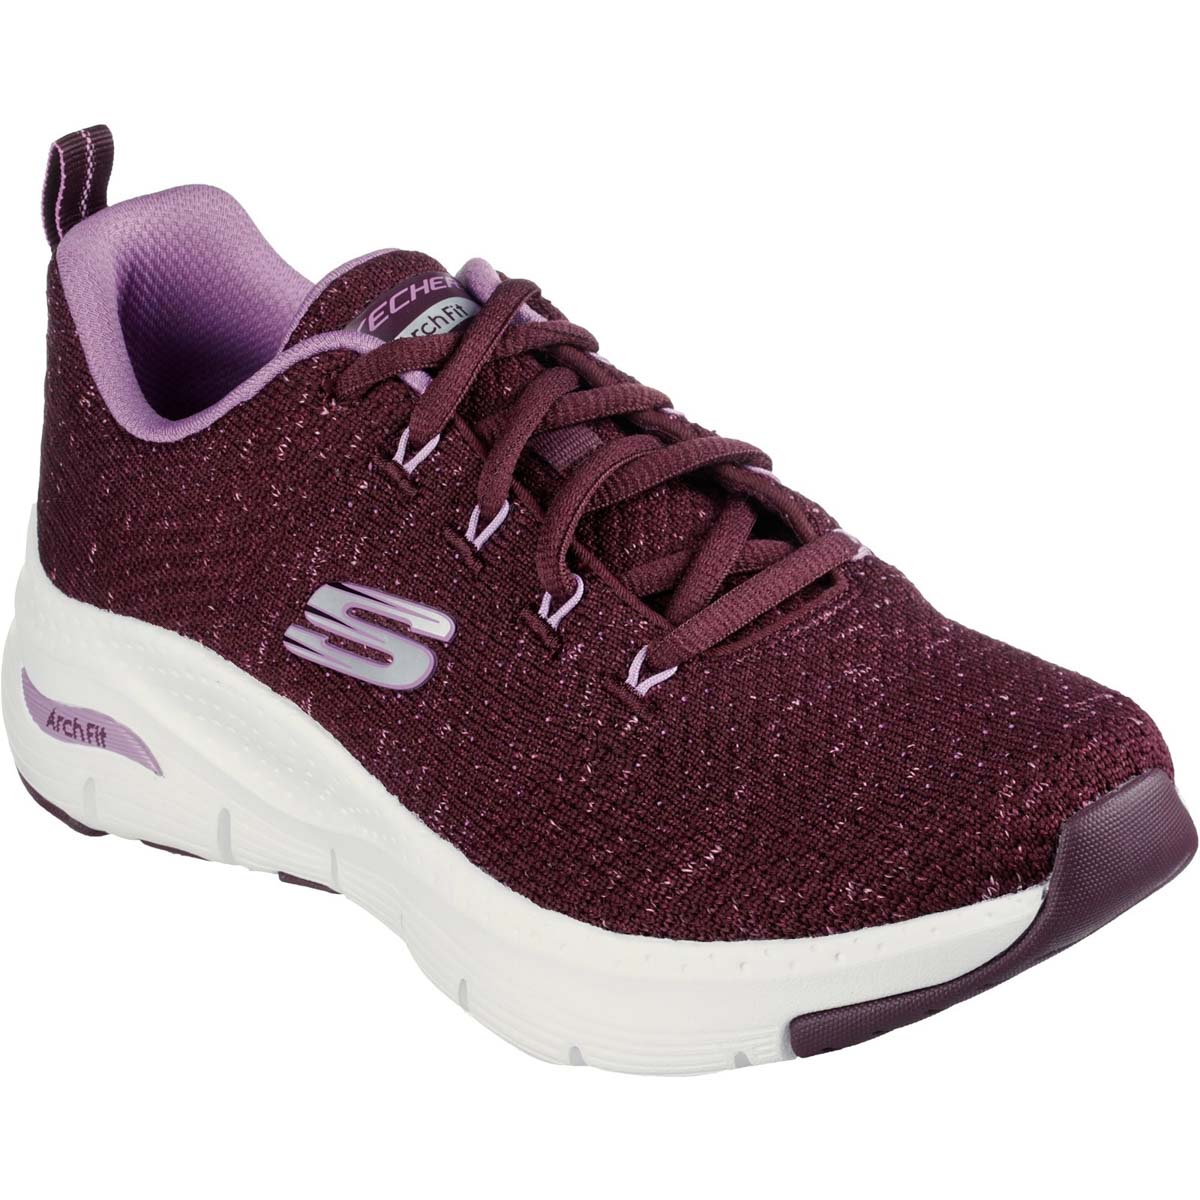 Skechers Arch Fit Glee For All Plum Womens Trainers 149713 In Size 7 In Plain Plum